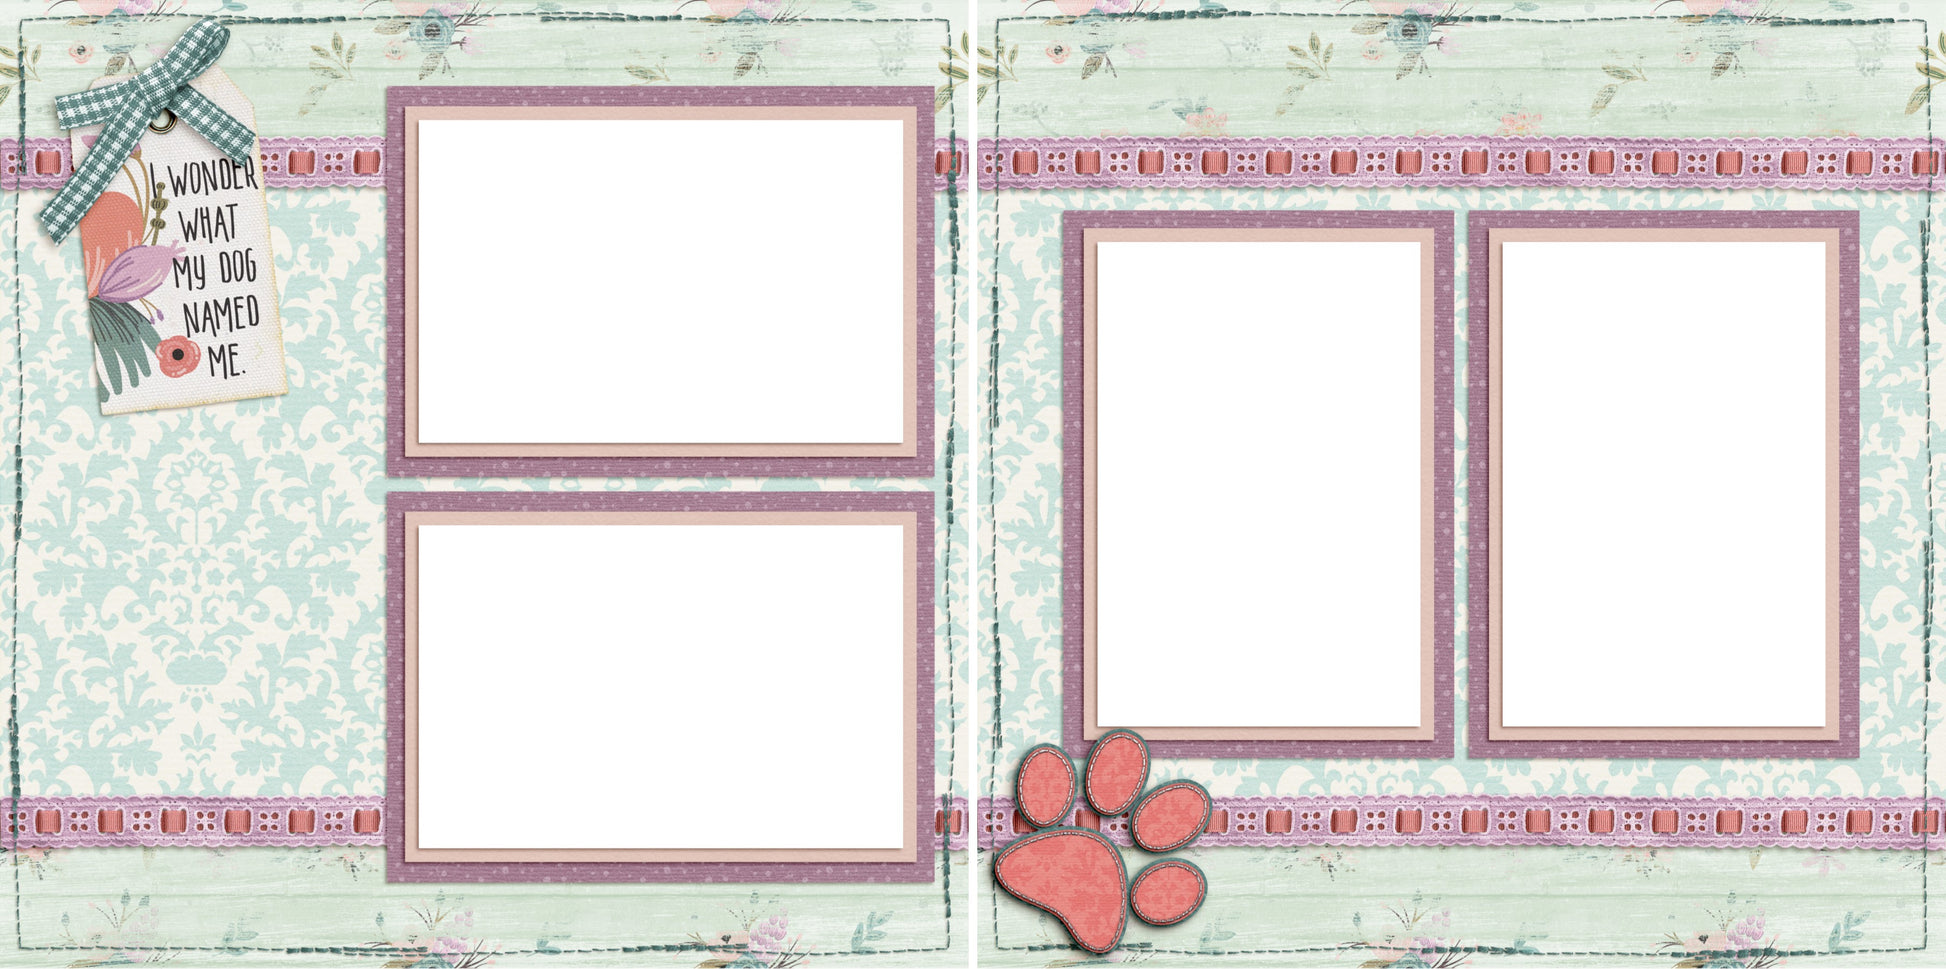 My Dog Named Me - Pink - Digital Scrapbook Pages - INSTANT DOWNLOAD - 2019 - EZscrapbooks Scrapbook Layouts dogs, Pets